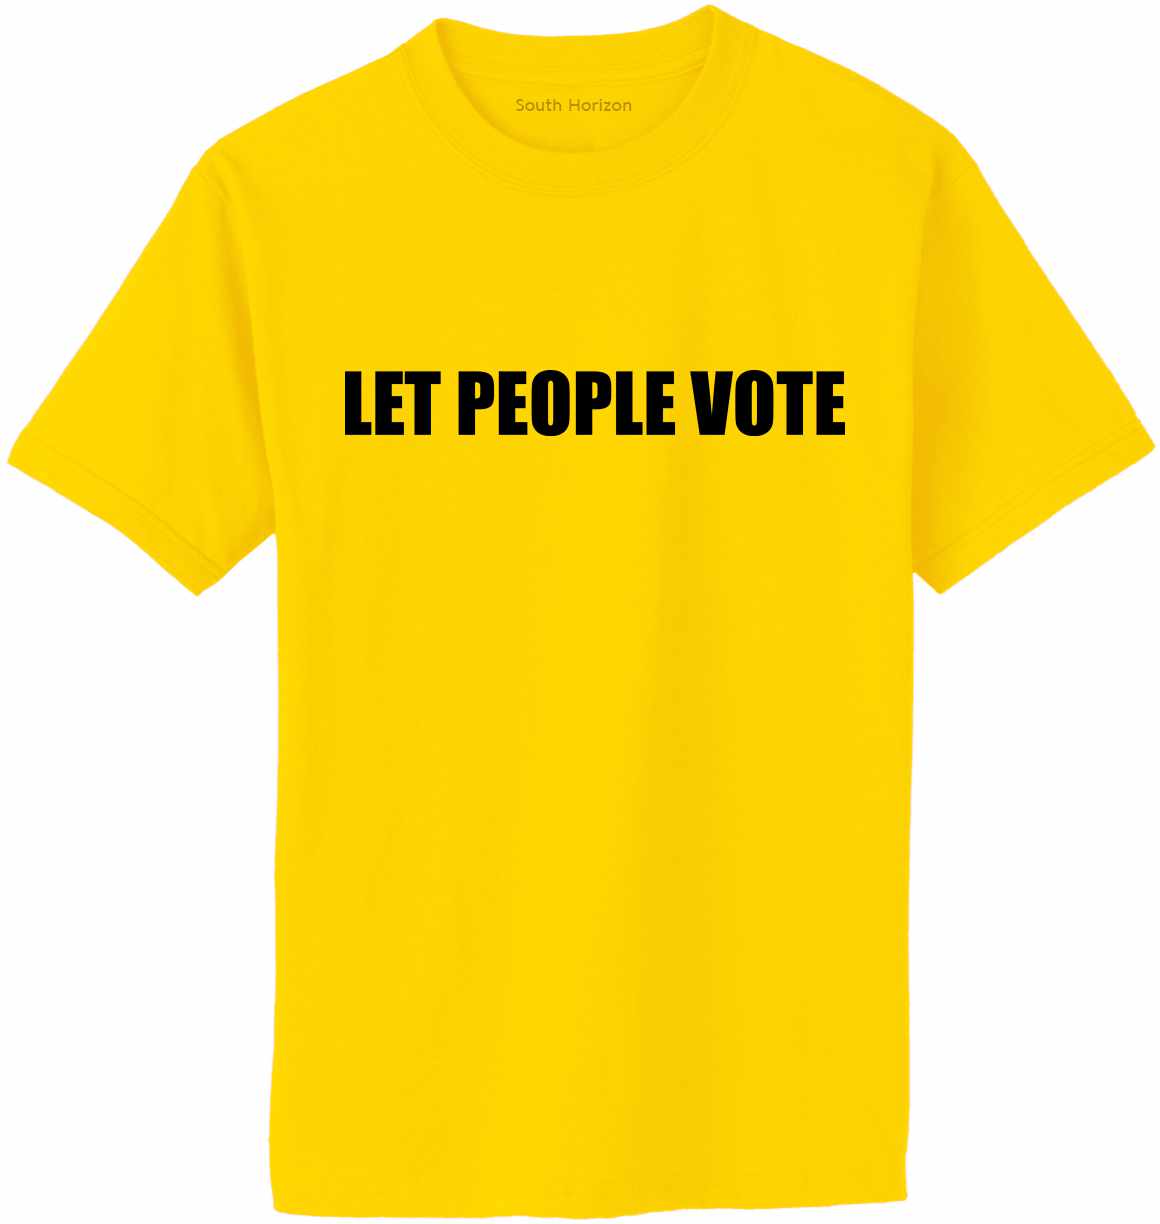 Let People Vote on Adult T-Shirt (#1216-1)